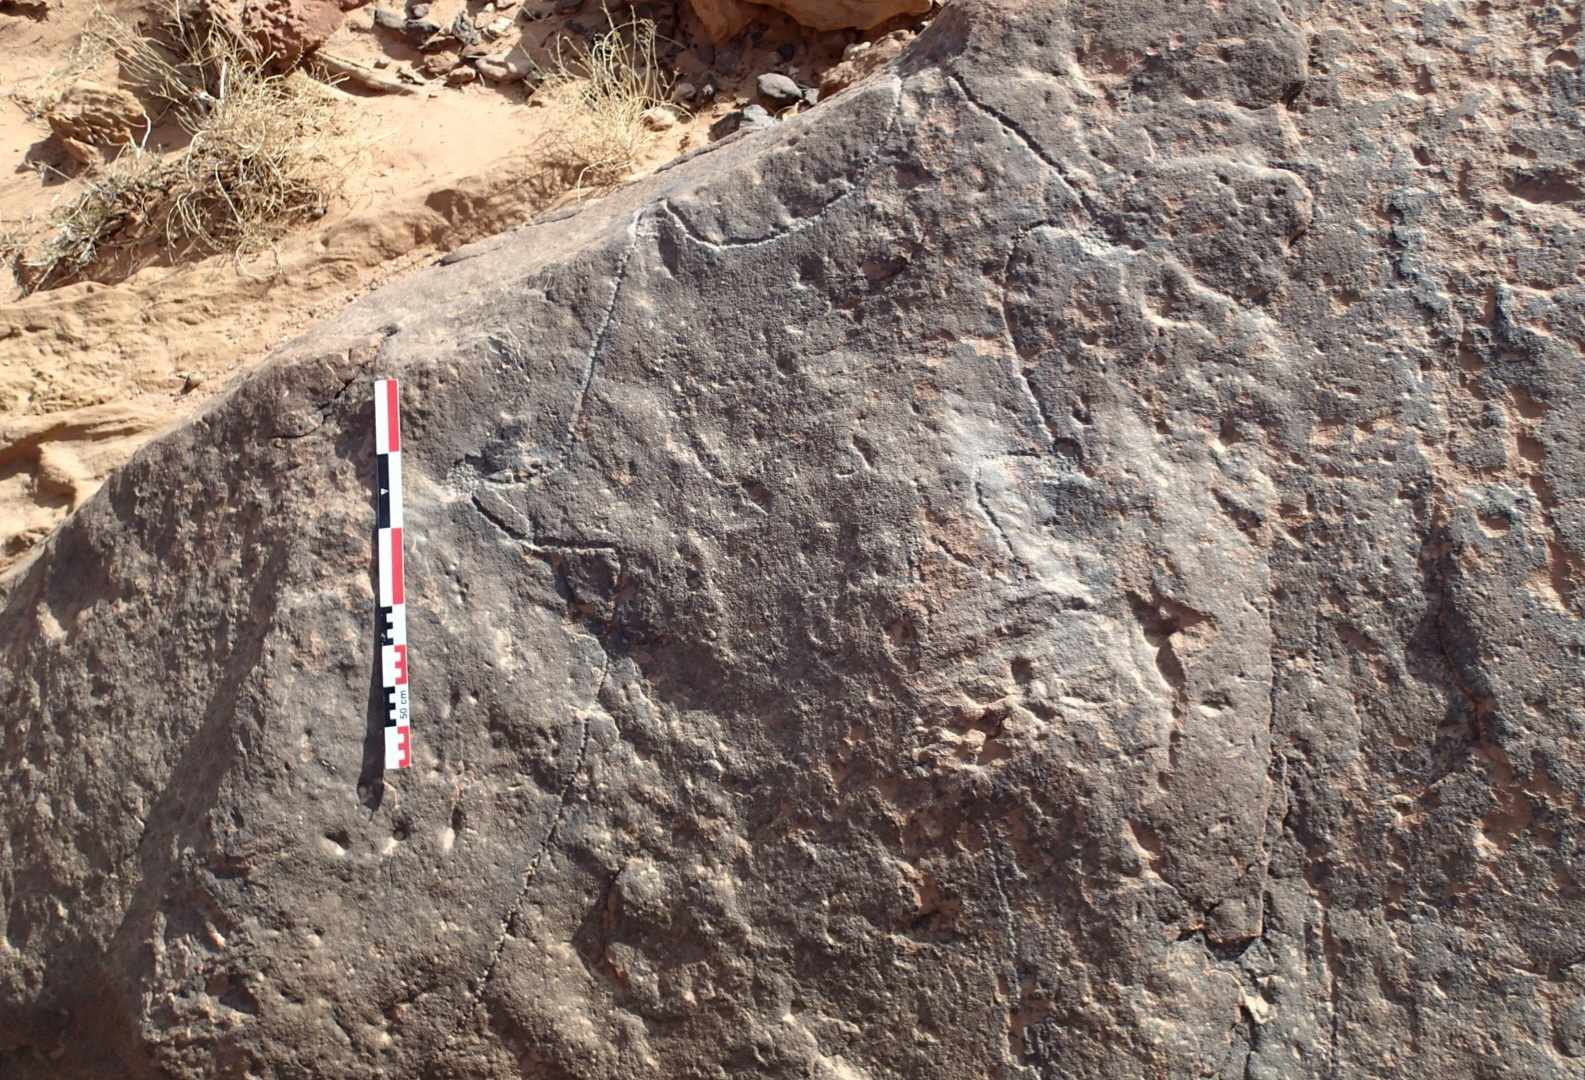 8,000-year-old rock carvings in Arabia may be the world's oldest megastructure blueprints 5